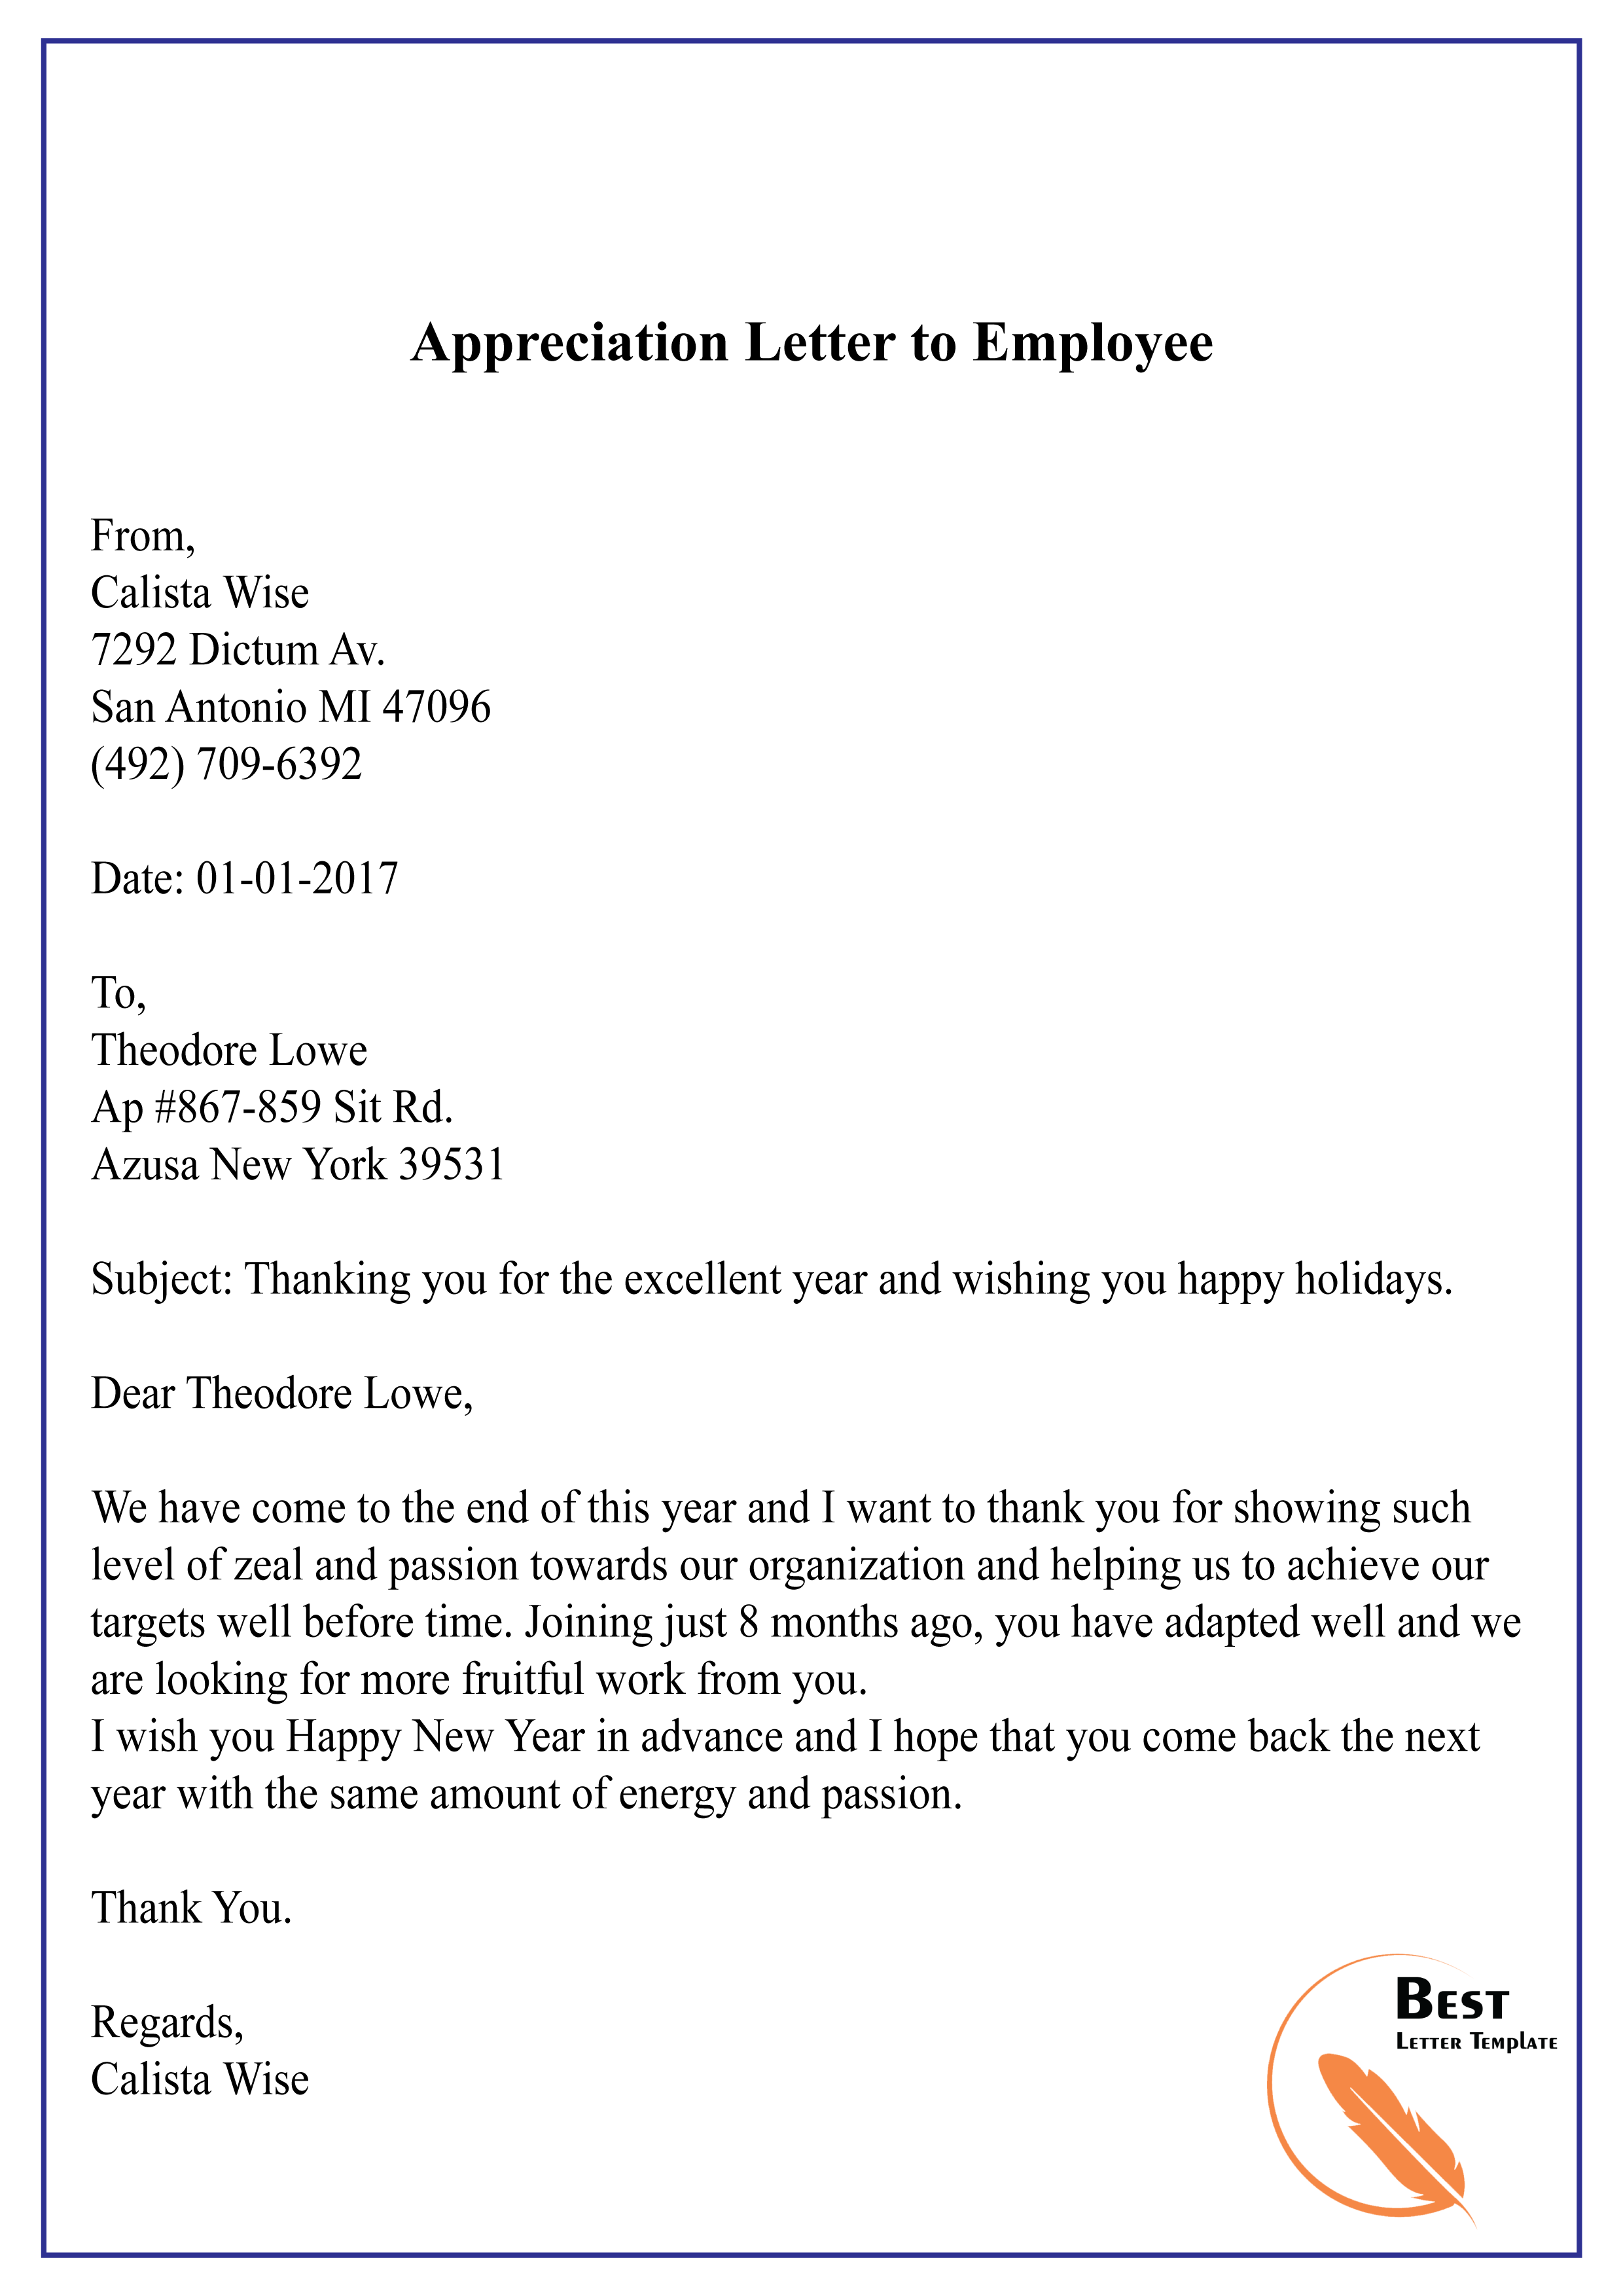 employee-welcome-letter